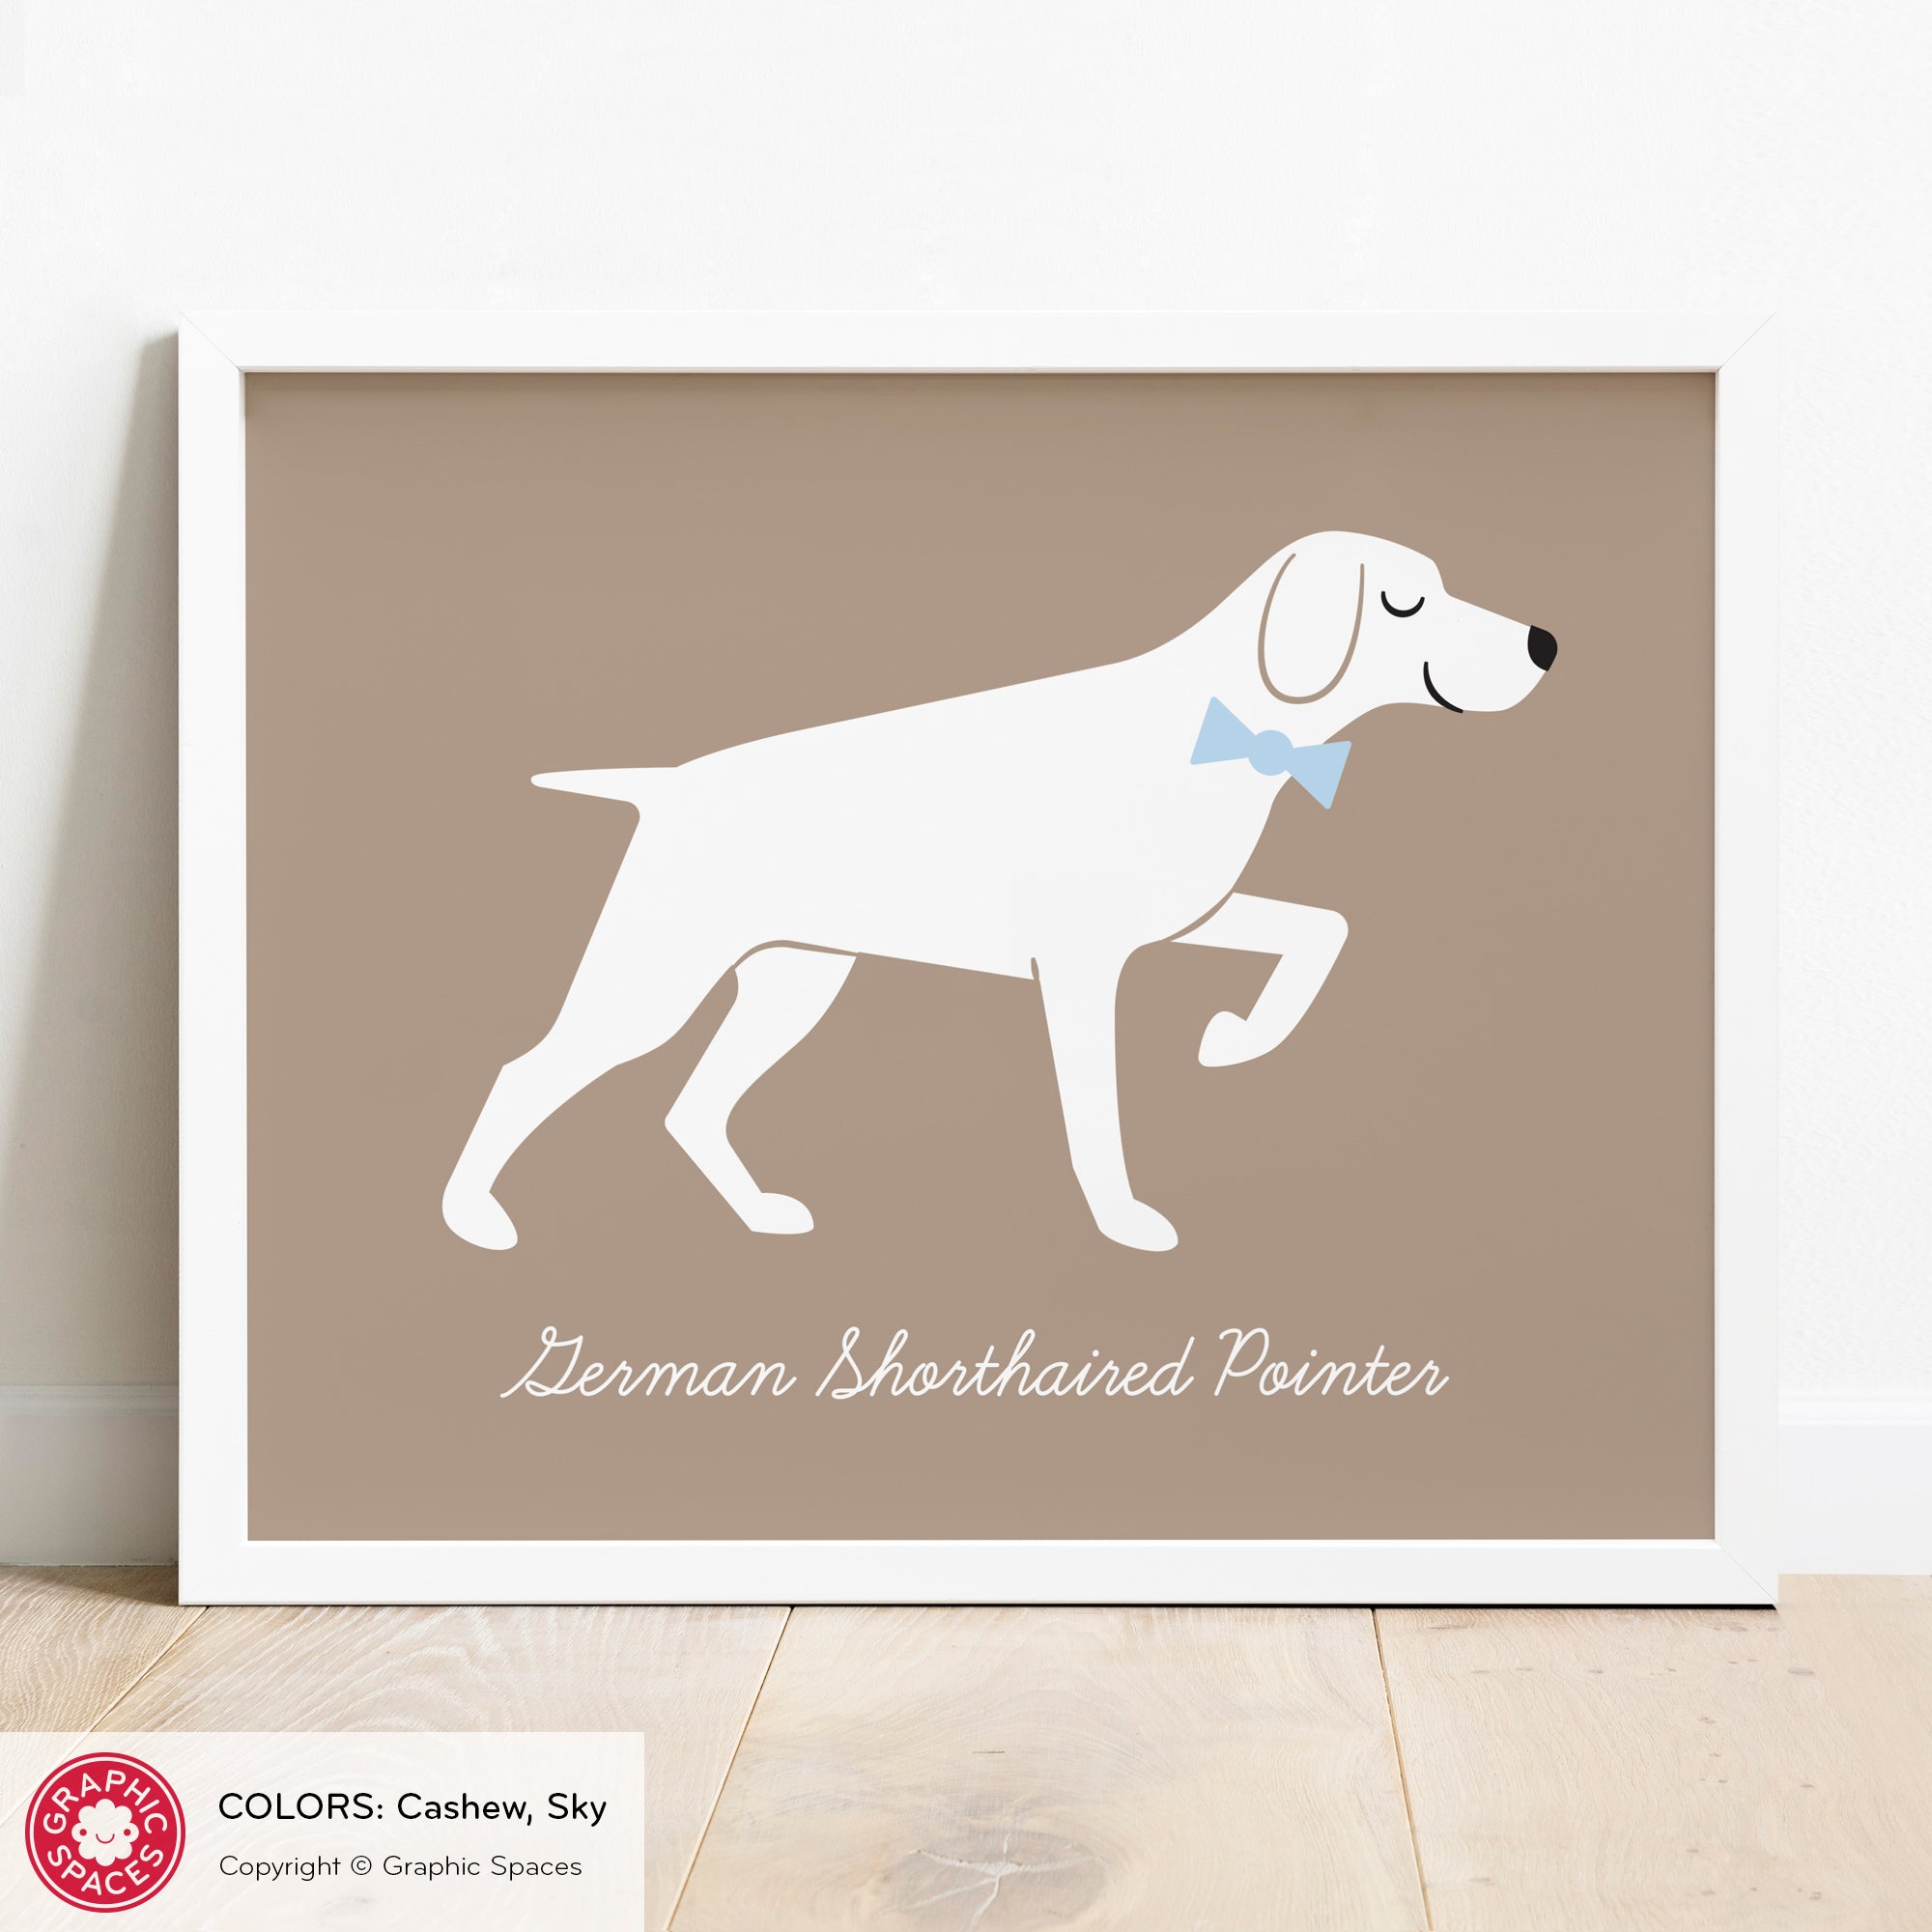 German Shorthaired Pointer nursery art print, personalized.